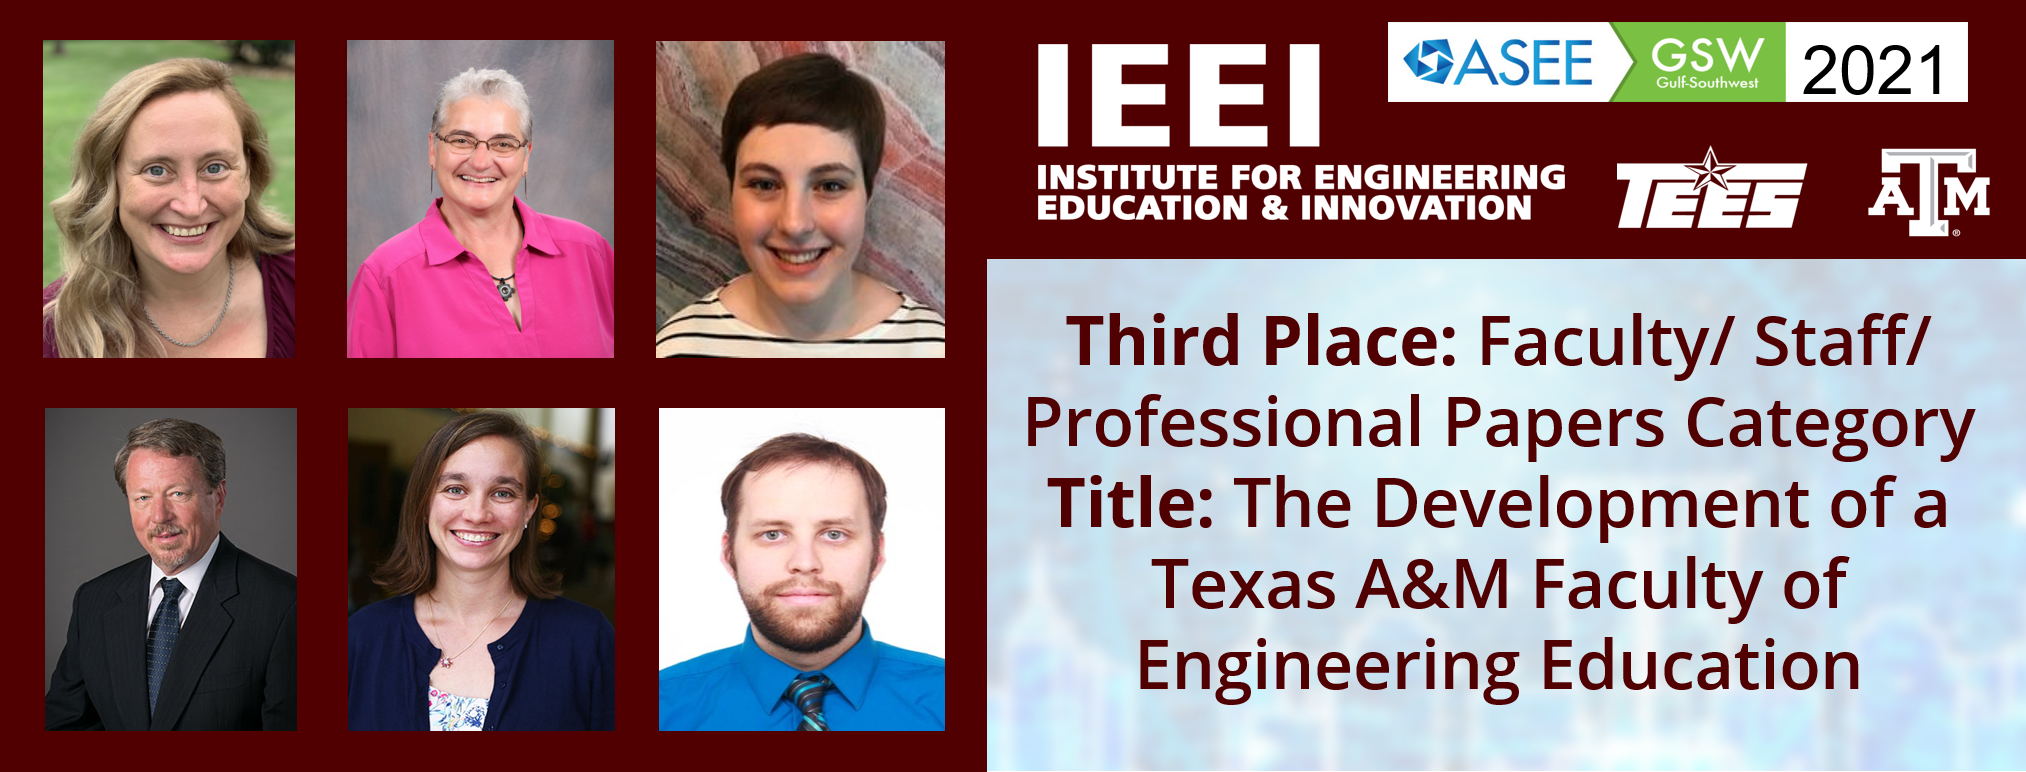 TAMU IEEI Paper Wins Third Place at ASEE GSW